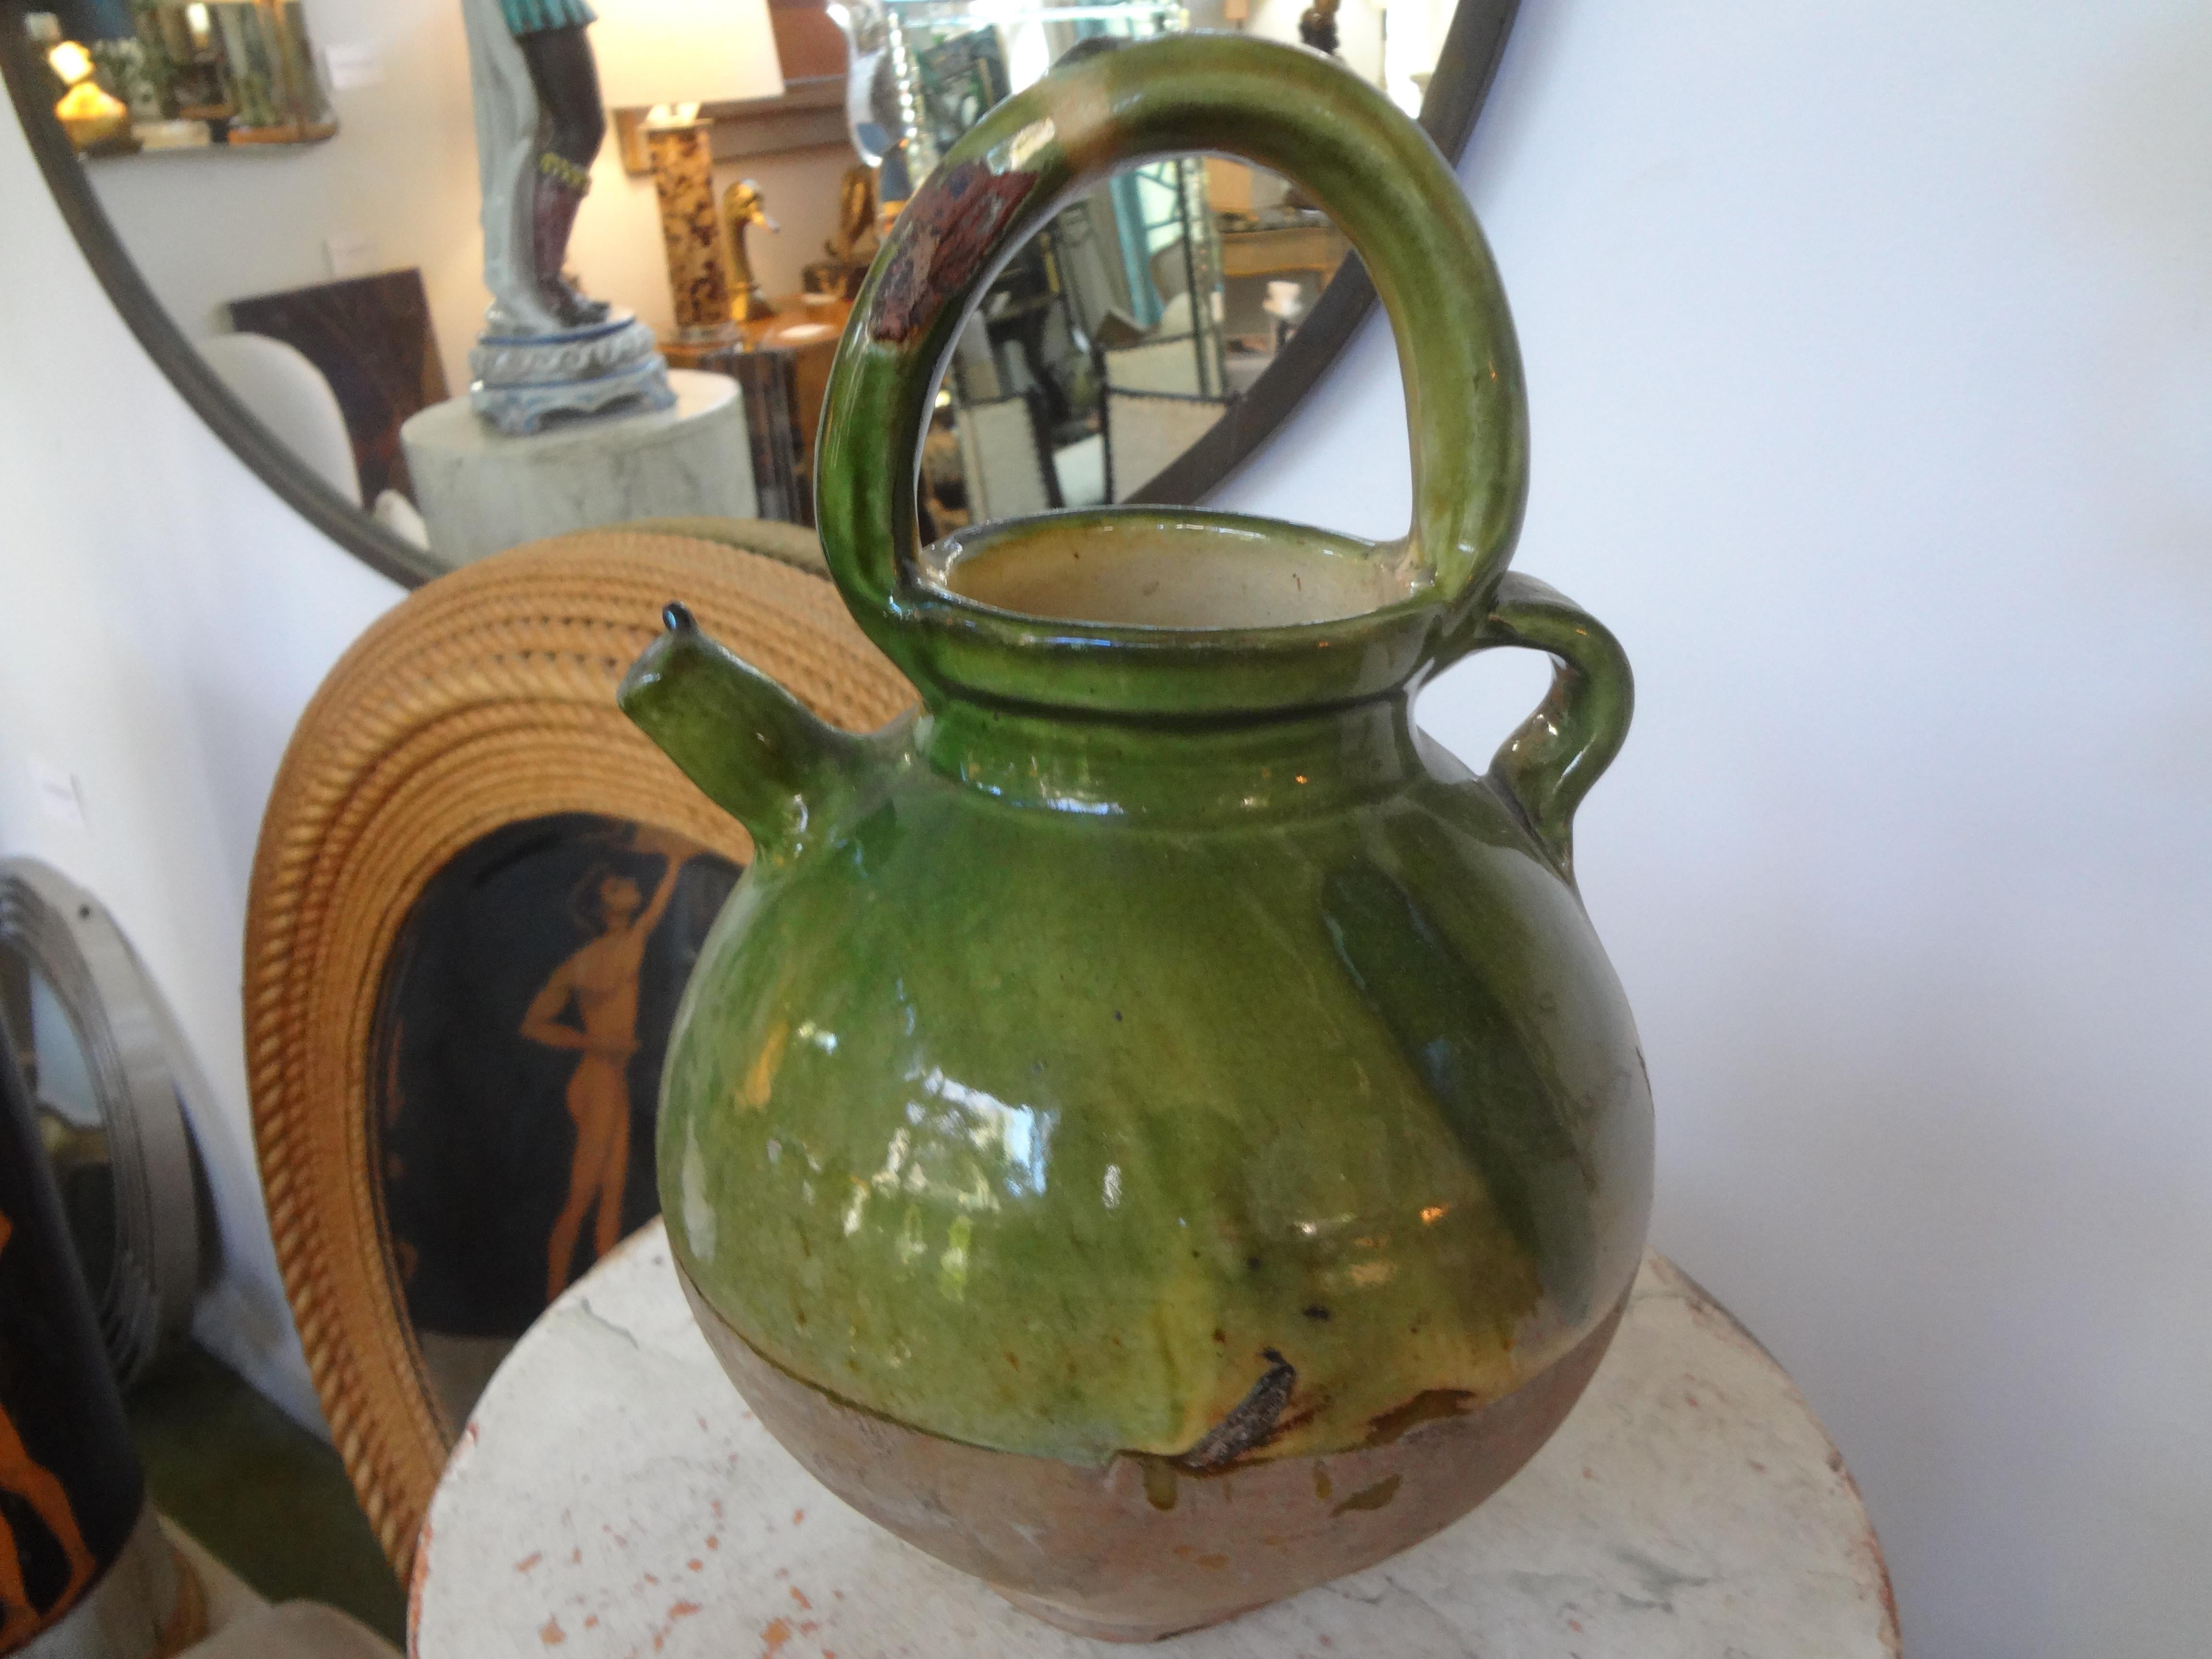 A 19th century French green glazed terracotta pottery vessel or pitcher. This vessel was used for milk or as a vinegar pot (vinaigrier). These vessels were most often from the Southwest part of France. Our pot is in good condition with some losses